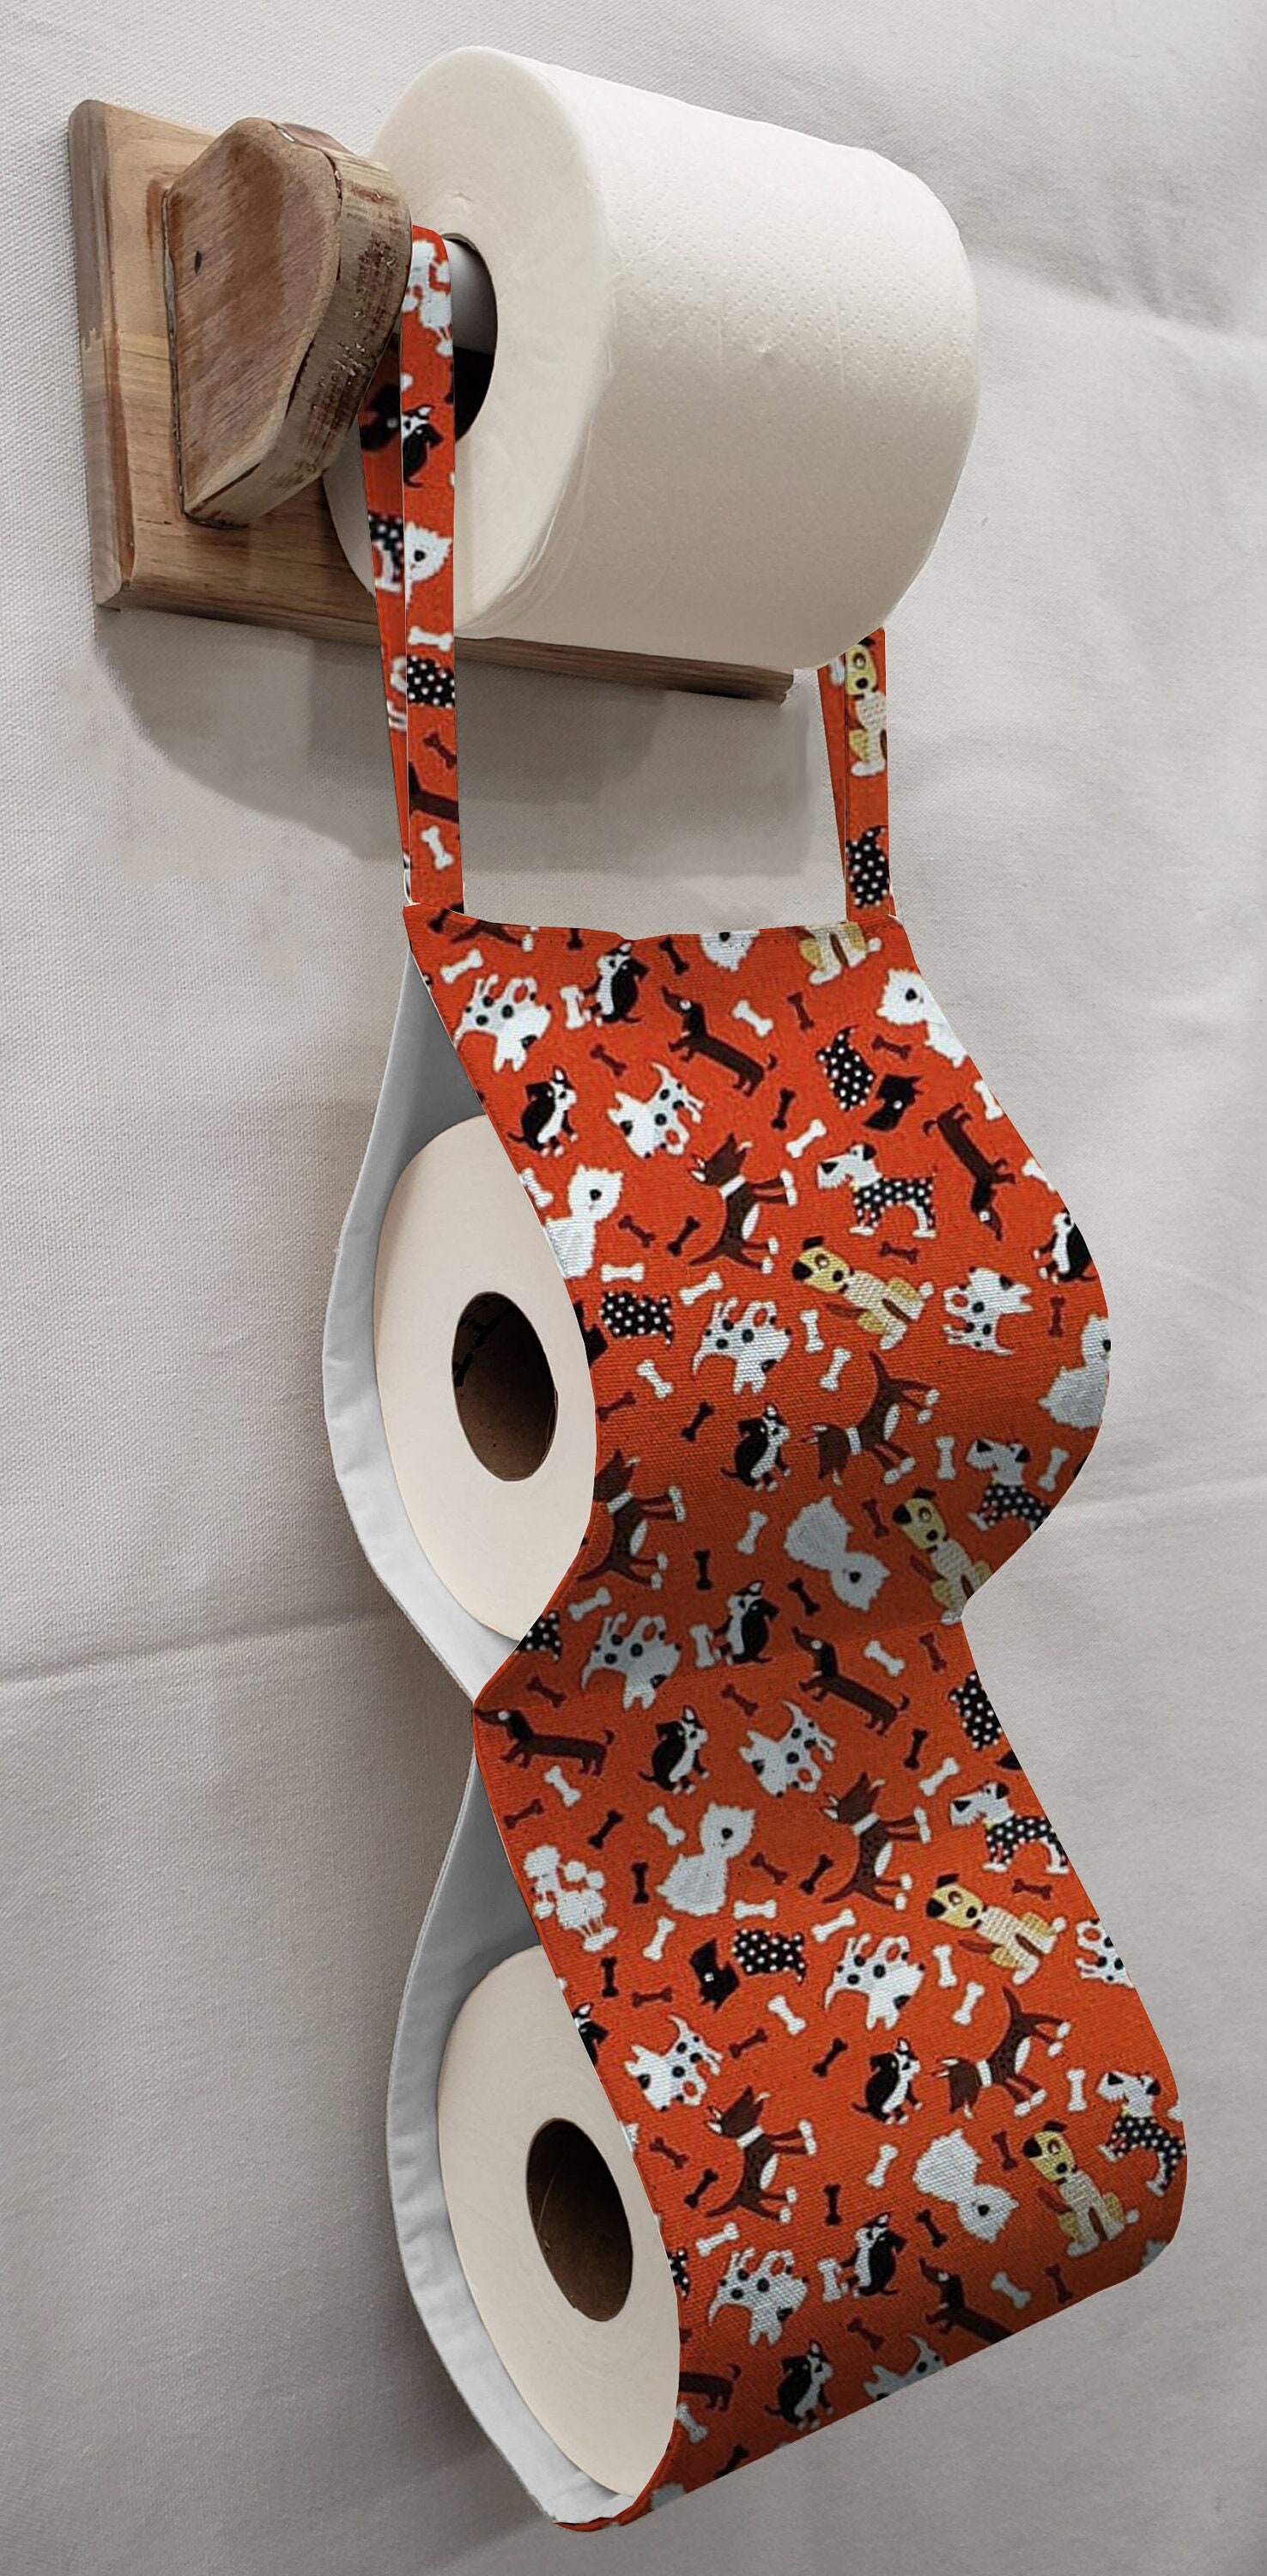 Puppy Dogs Toilet Paper Holder 